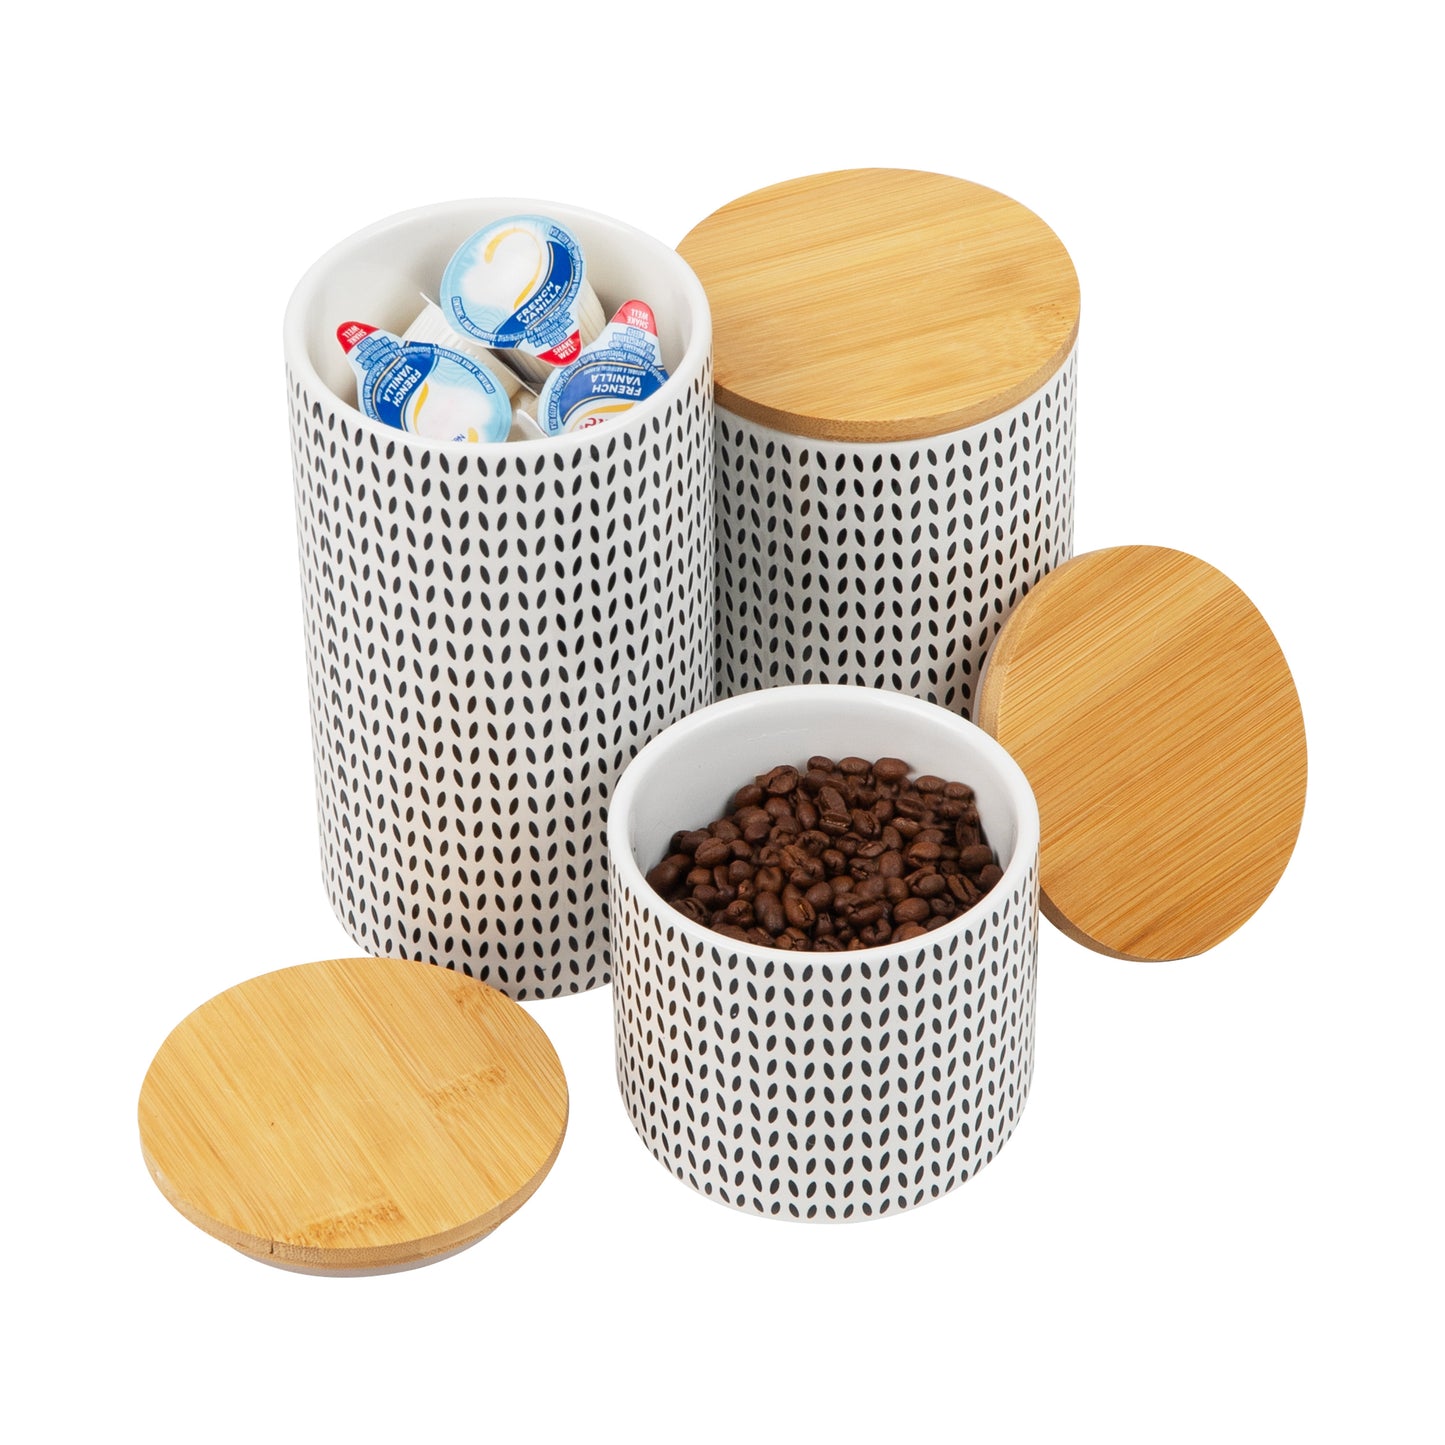 Mind Reader 3-Piece Canister Set, Small 14oz., Medium 24oz., and Large 23oz. Capacity, with Wooden Lids, Kitchen Storage, Countertop Organizer, Space Saver, Black and White